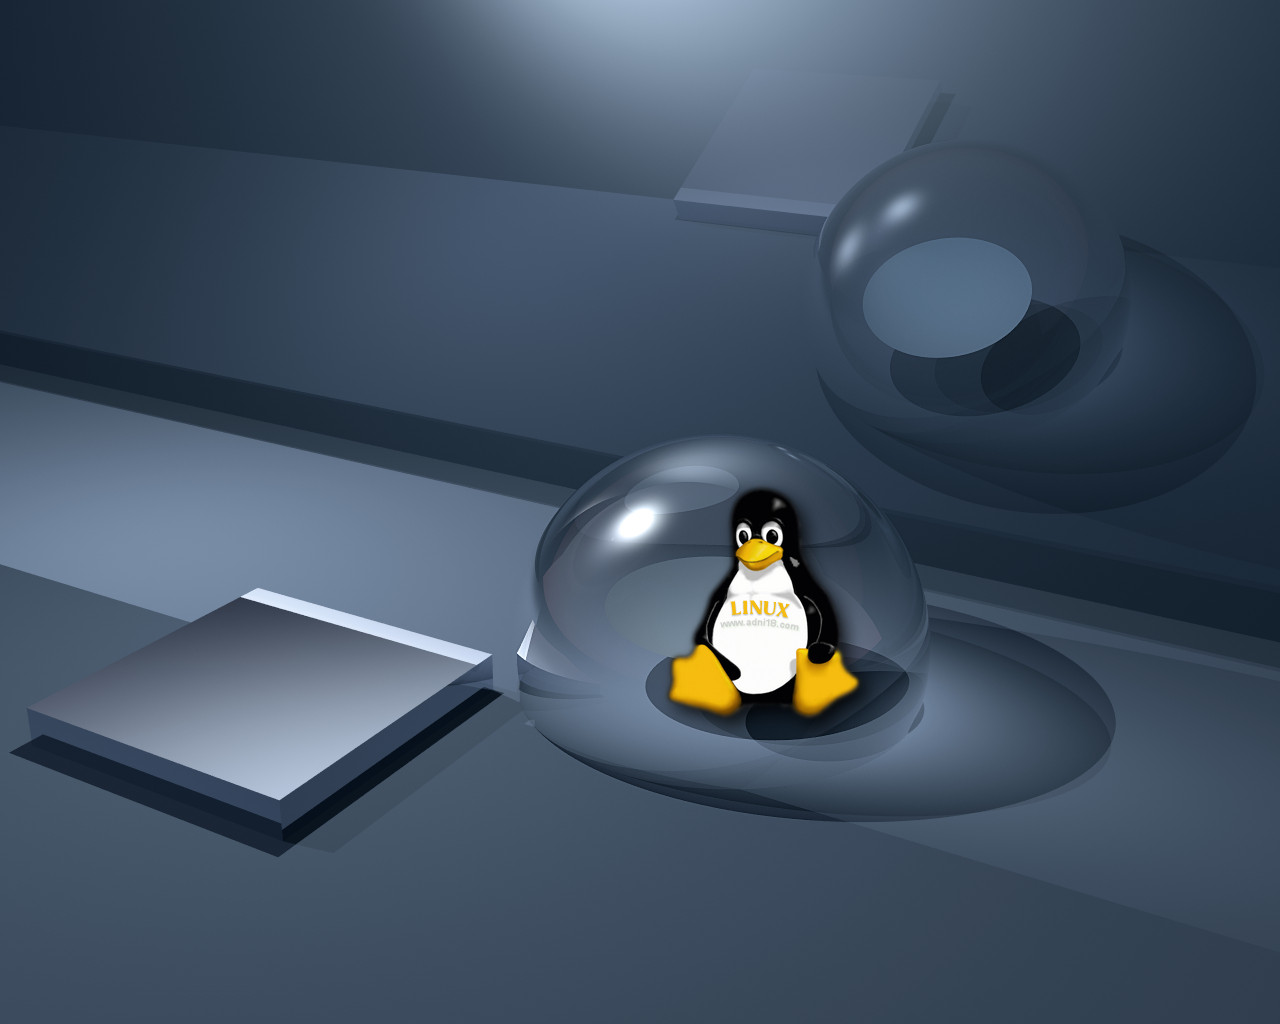 Cool Linux Background